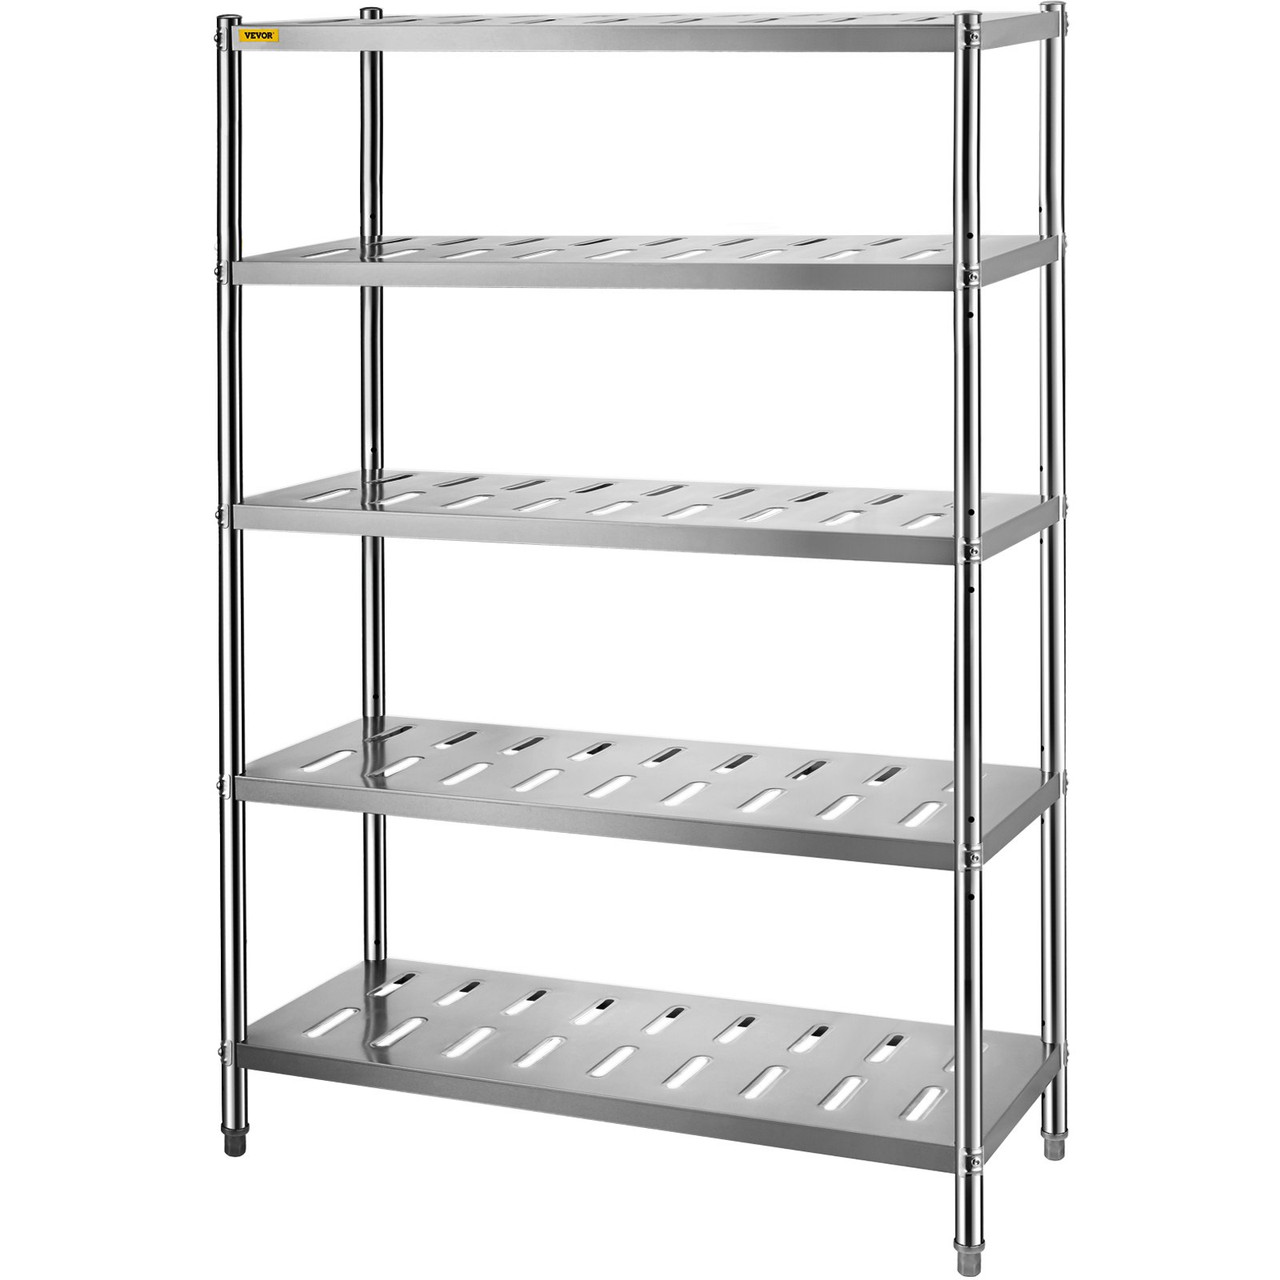 Storage Shelf, 5-Tier Storage Shelving Unit, Stainless Steel Garage Shelf, 47.2 x 17.7 x 70.9 inch Heavy Duty Storage Shelving, 661 Lbs Total Capacity with Adjustable Height and Vent Holes